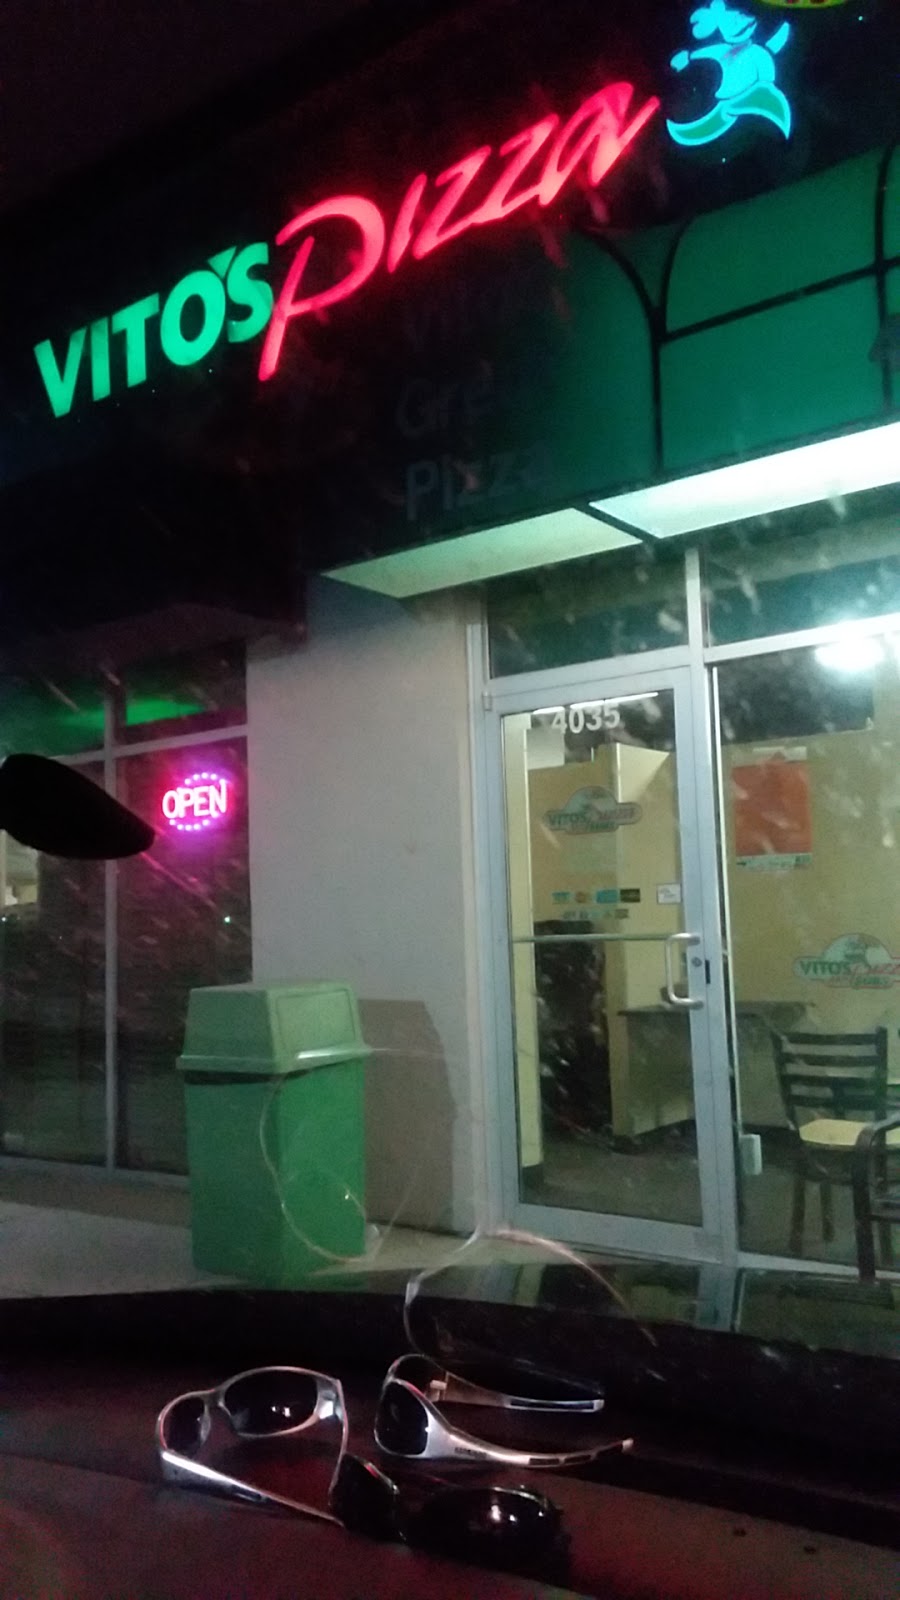 Vitos Pizza and Subs Oregon, Northwood, Curtice | 4035 Navarre Ave, Oregon, OH 43616 | Phone: (419) 697-8486